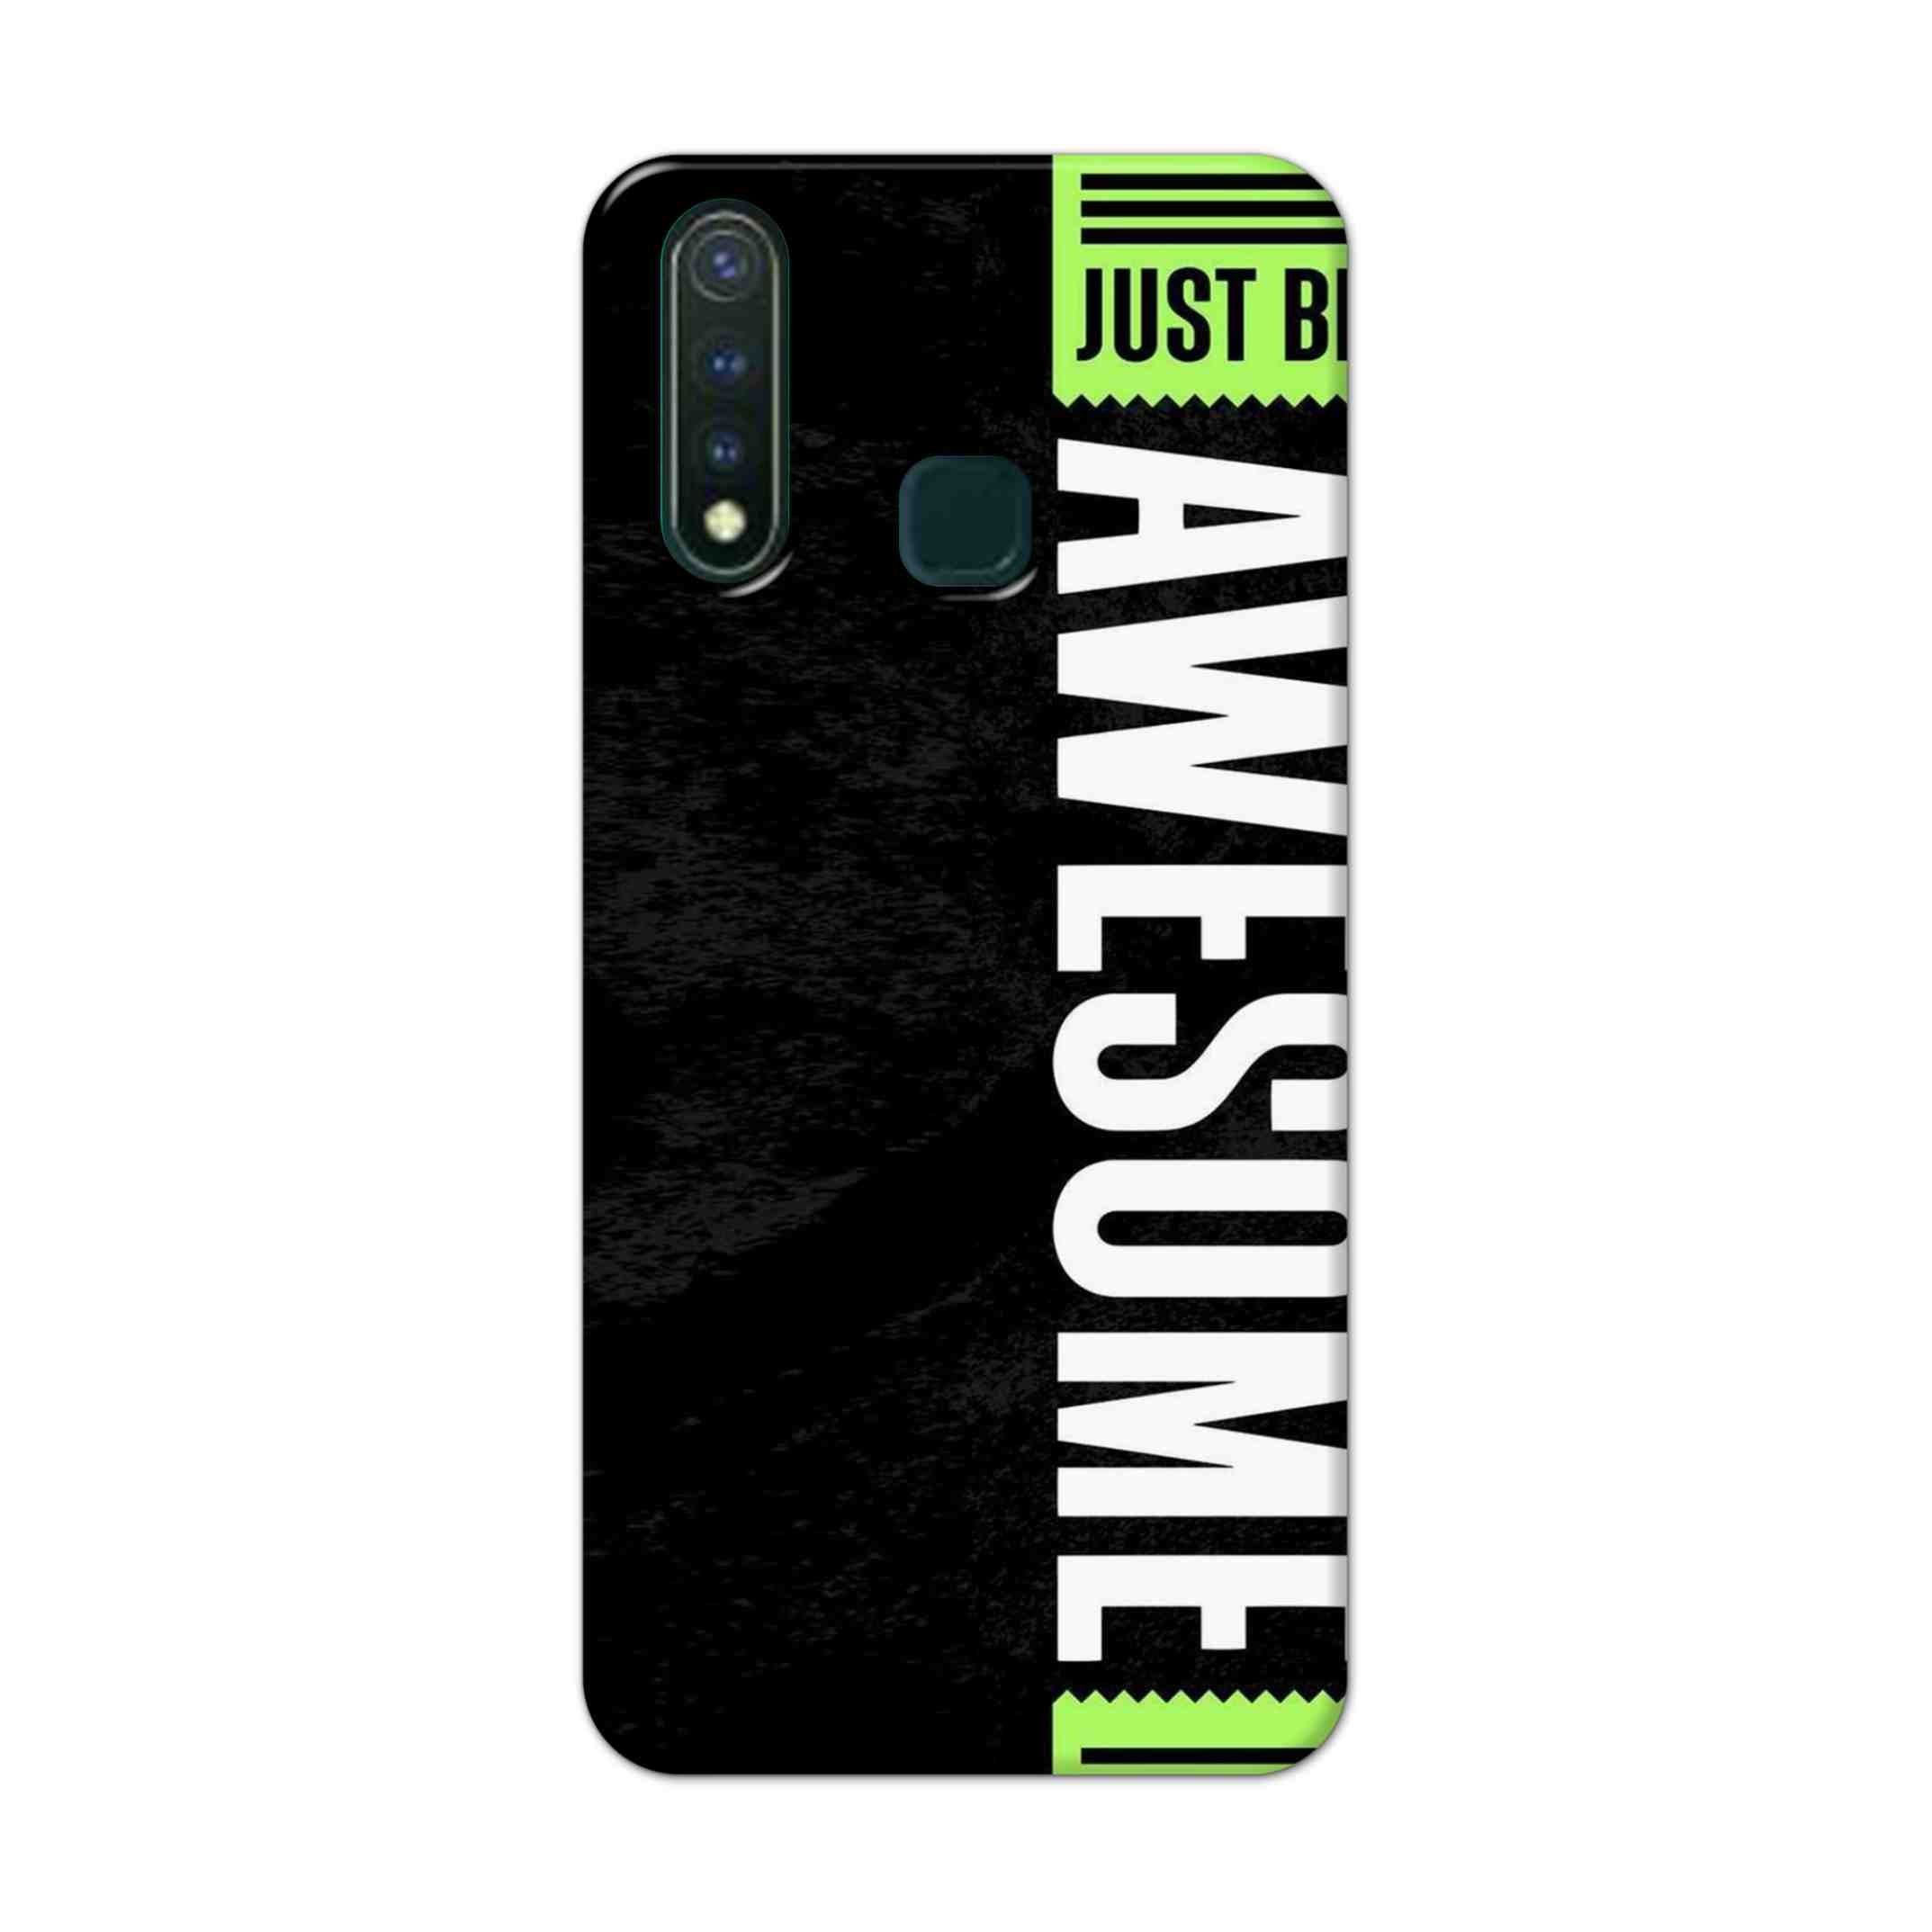 Buy Awesome Street Hard Back Mobile Phone Case Cover For Vivo Y19 Online